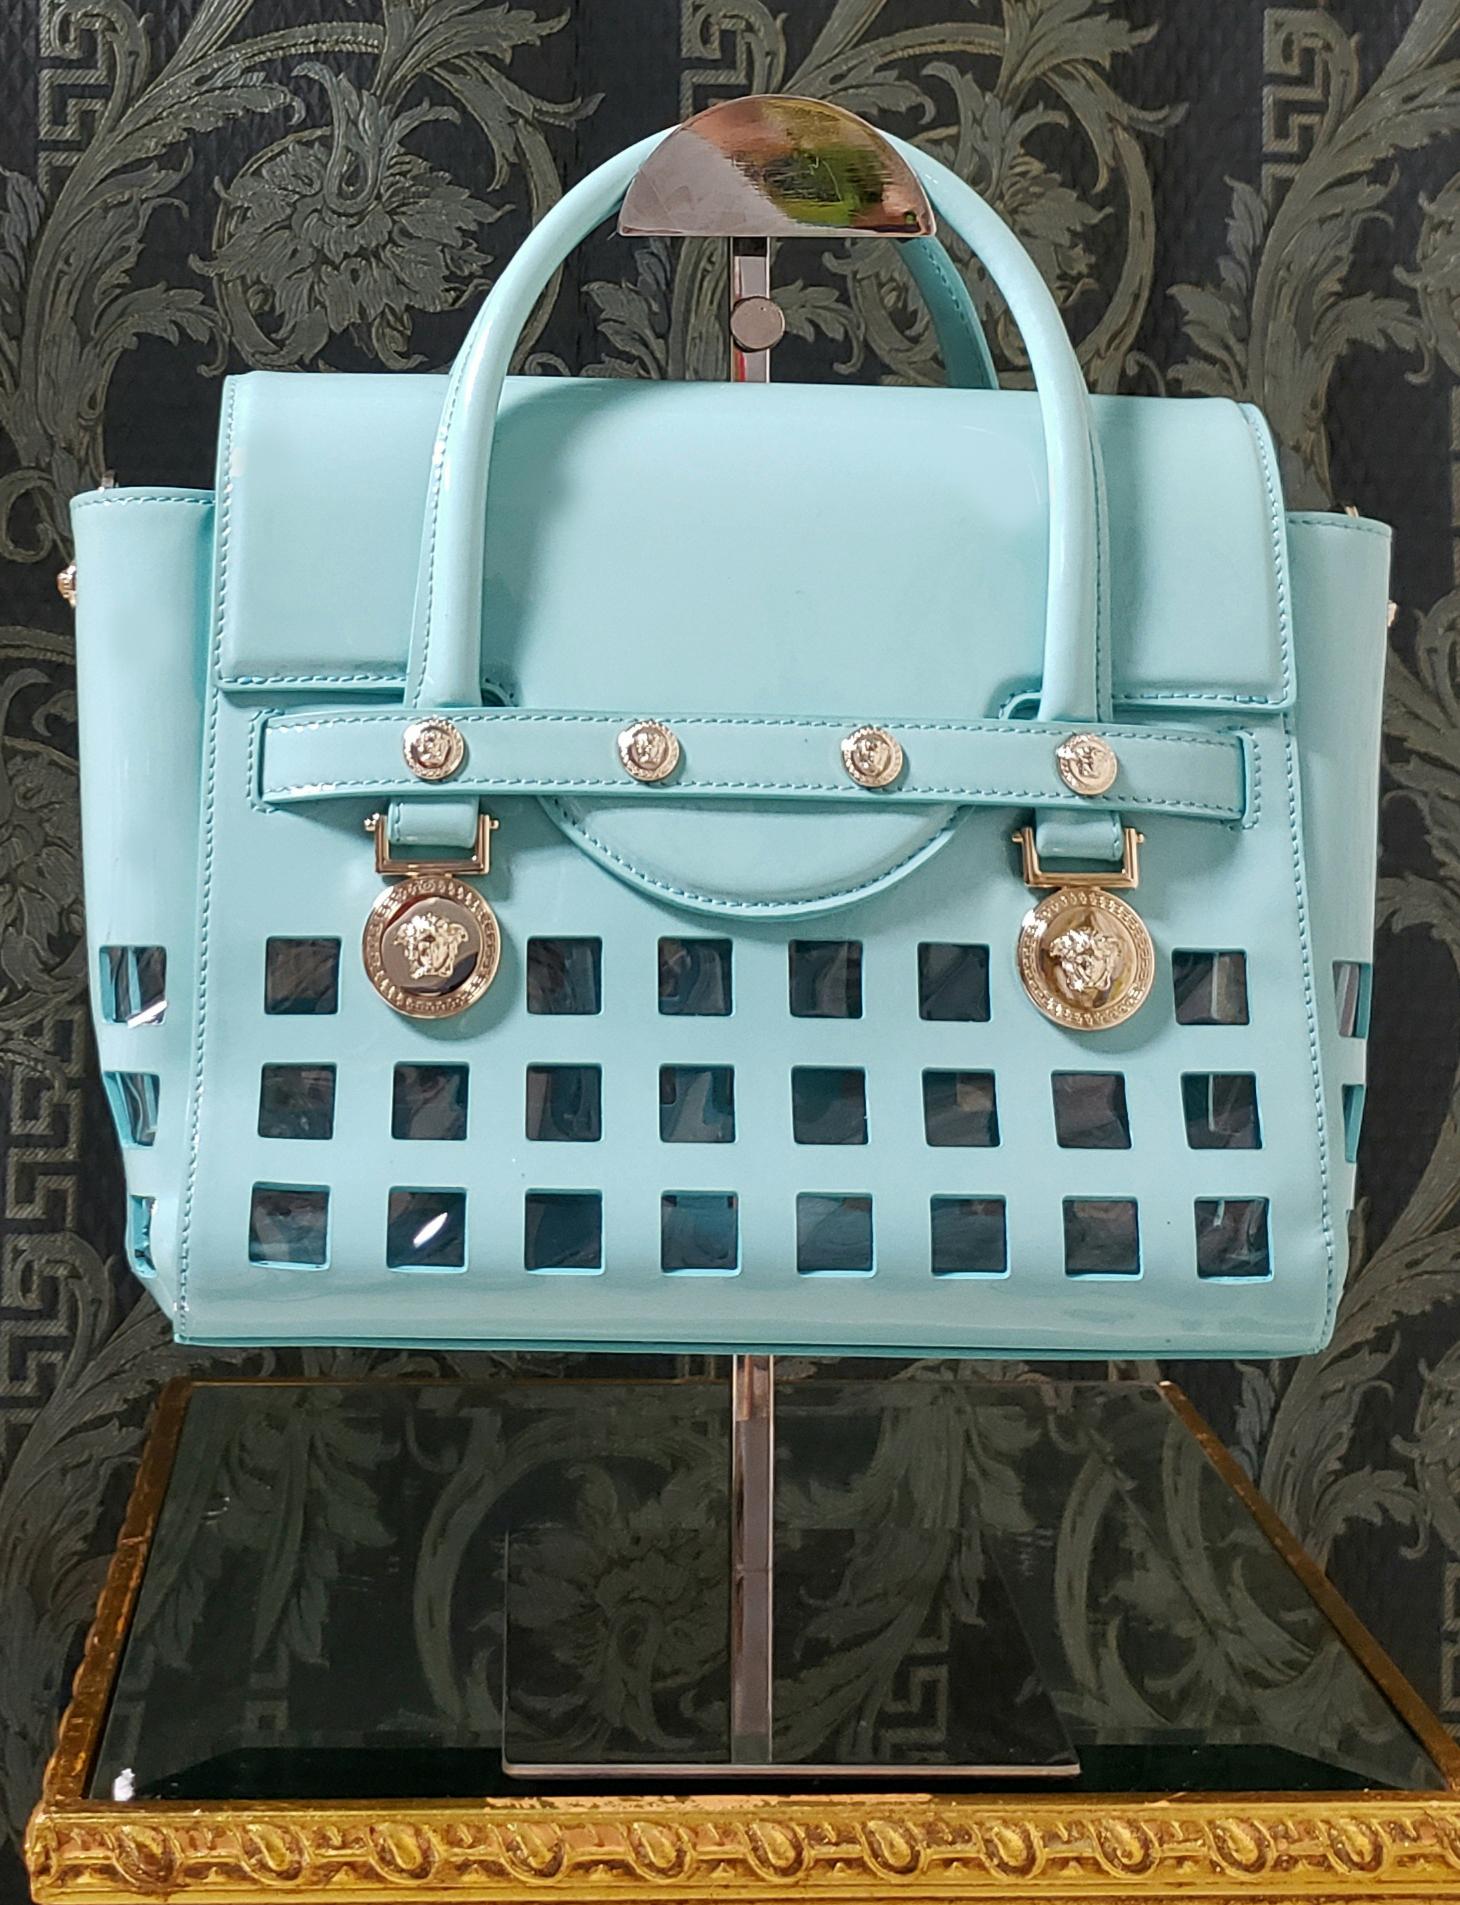 F/S 2015 Look # 9 VERSACE PERFORATED PATENT BLUE LEATHER BAG im Zustand „Neu“ im Angebot in Montgomery, TX